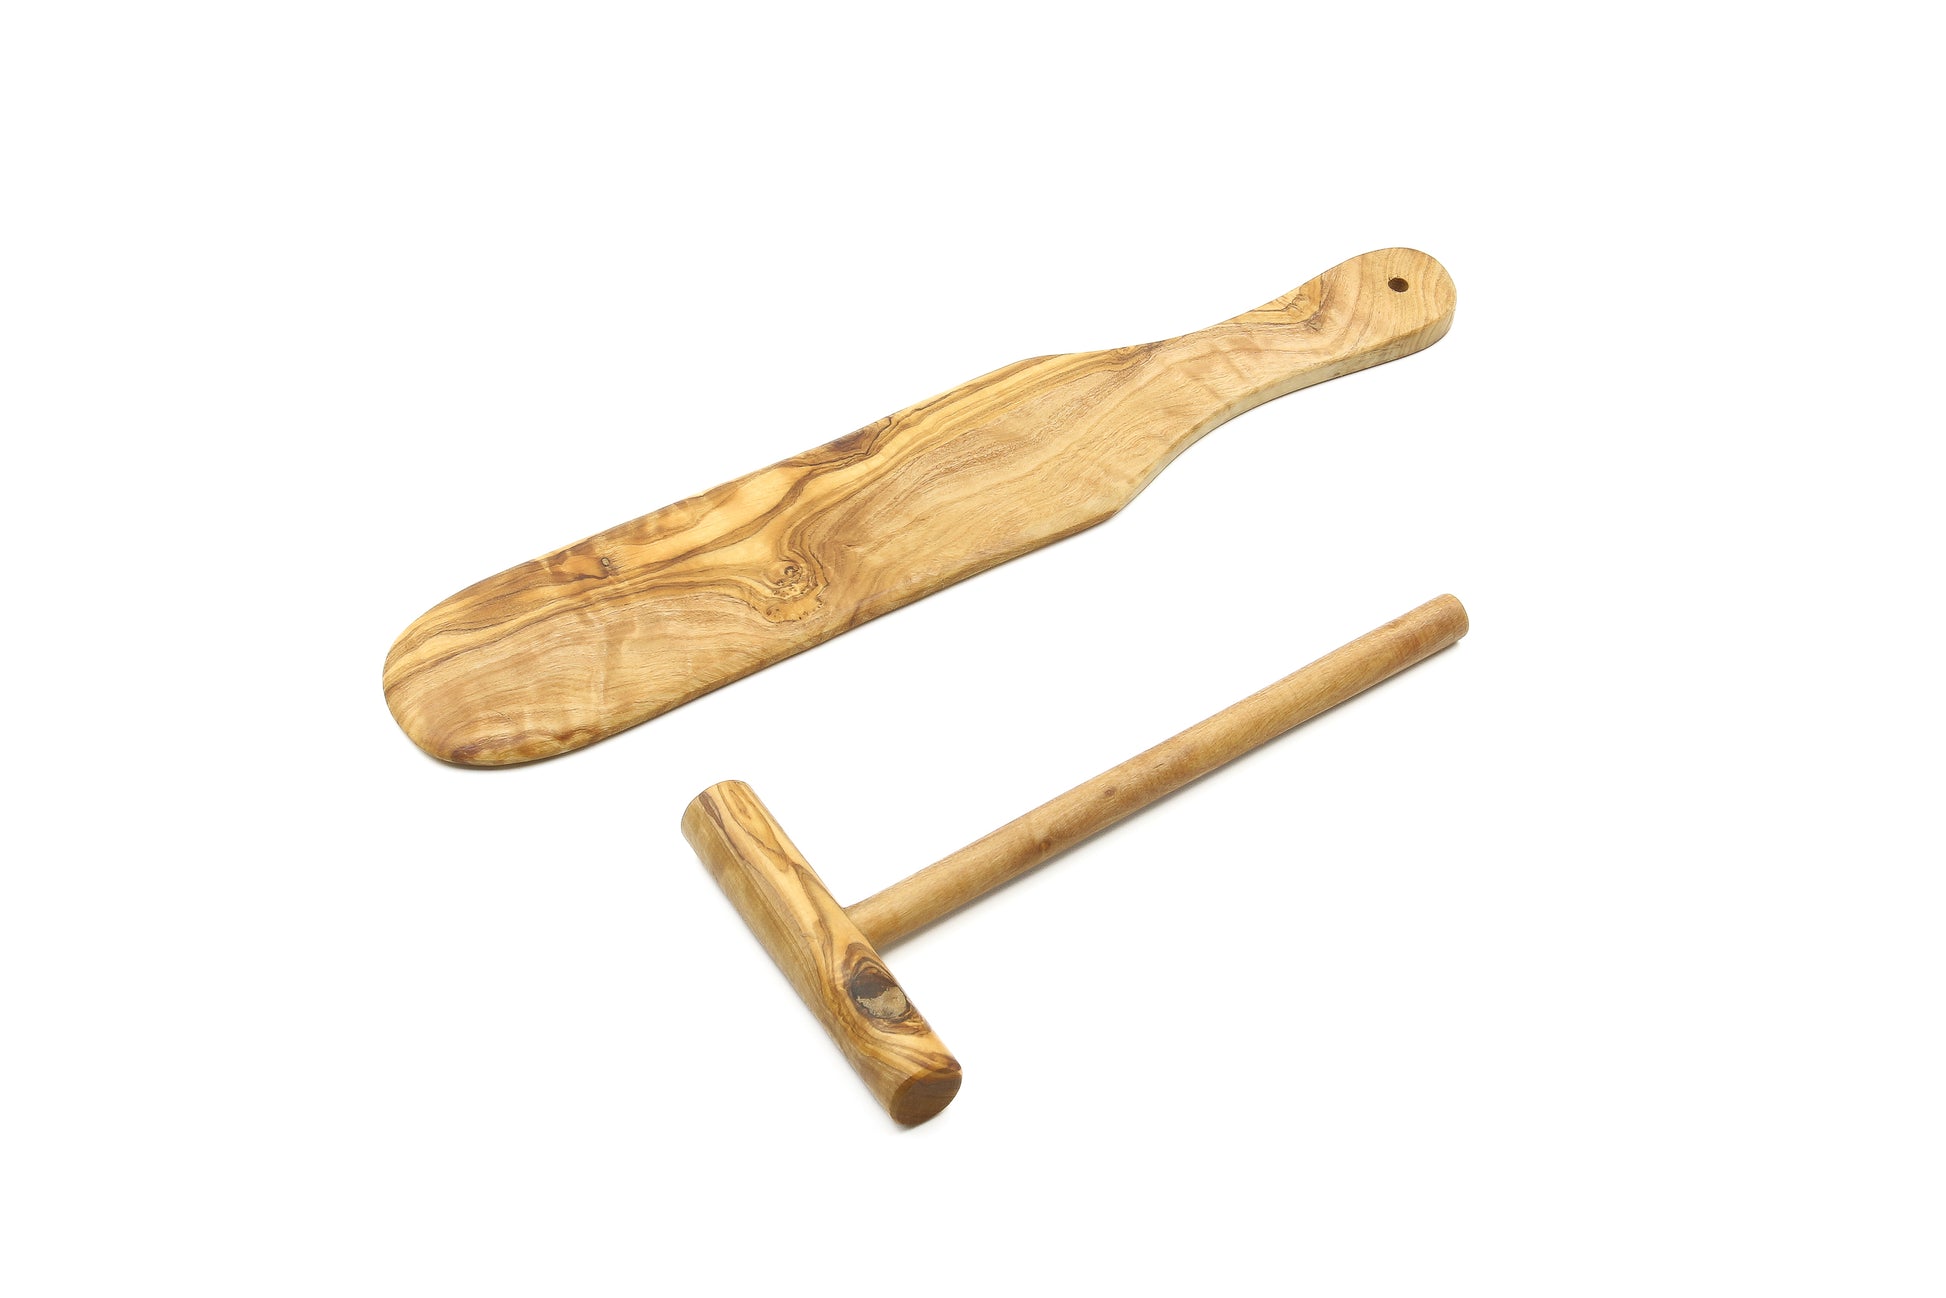 Olive wood set for creating delicious crepes and pancakes, the Basic set